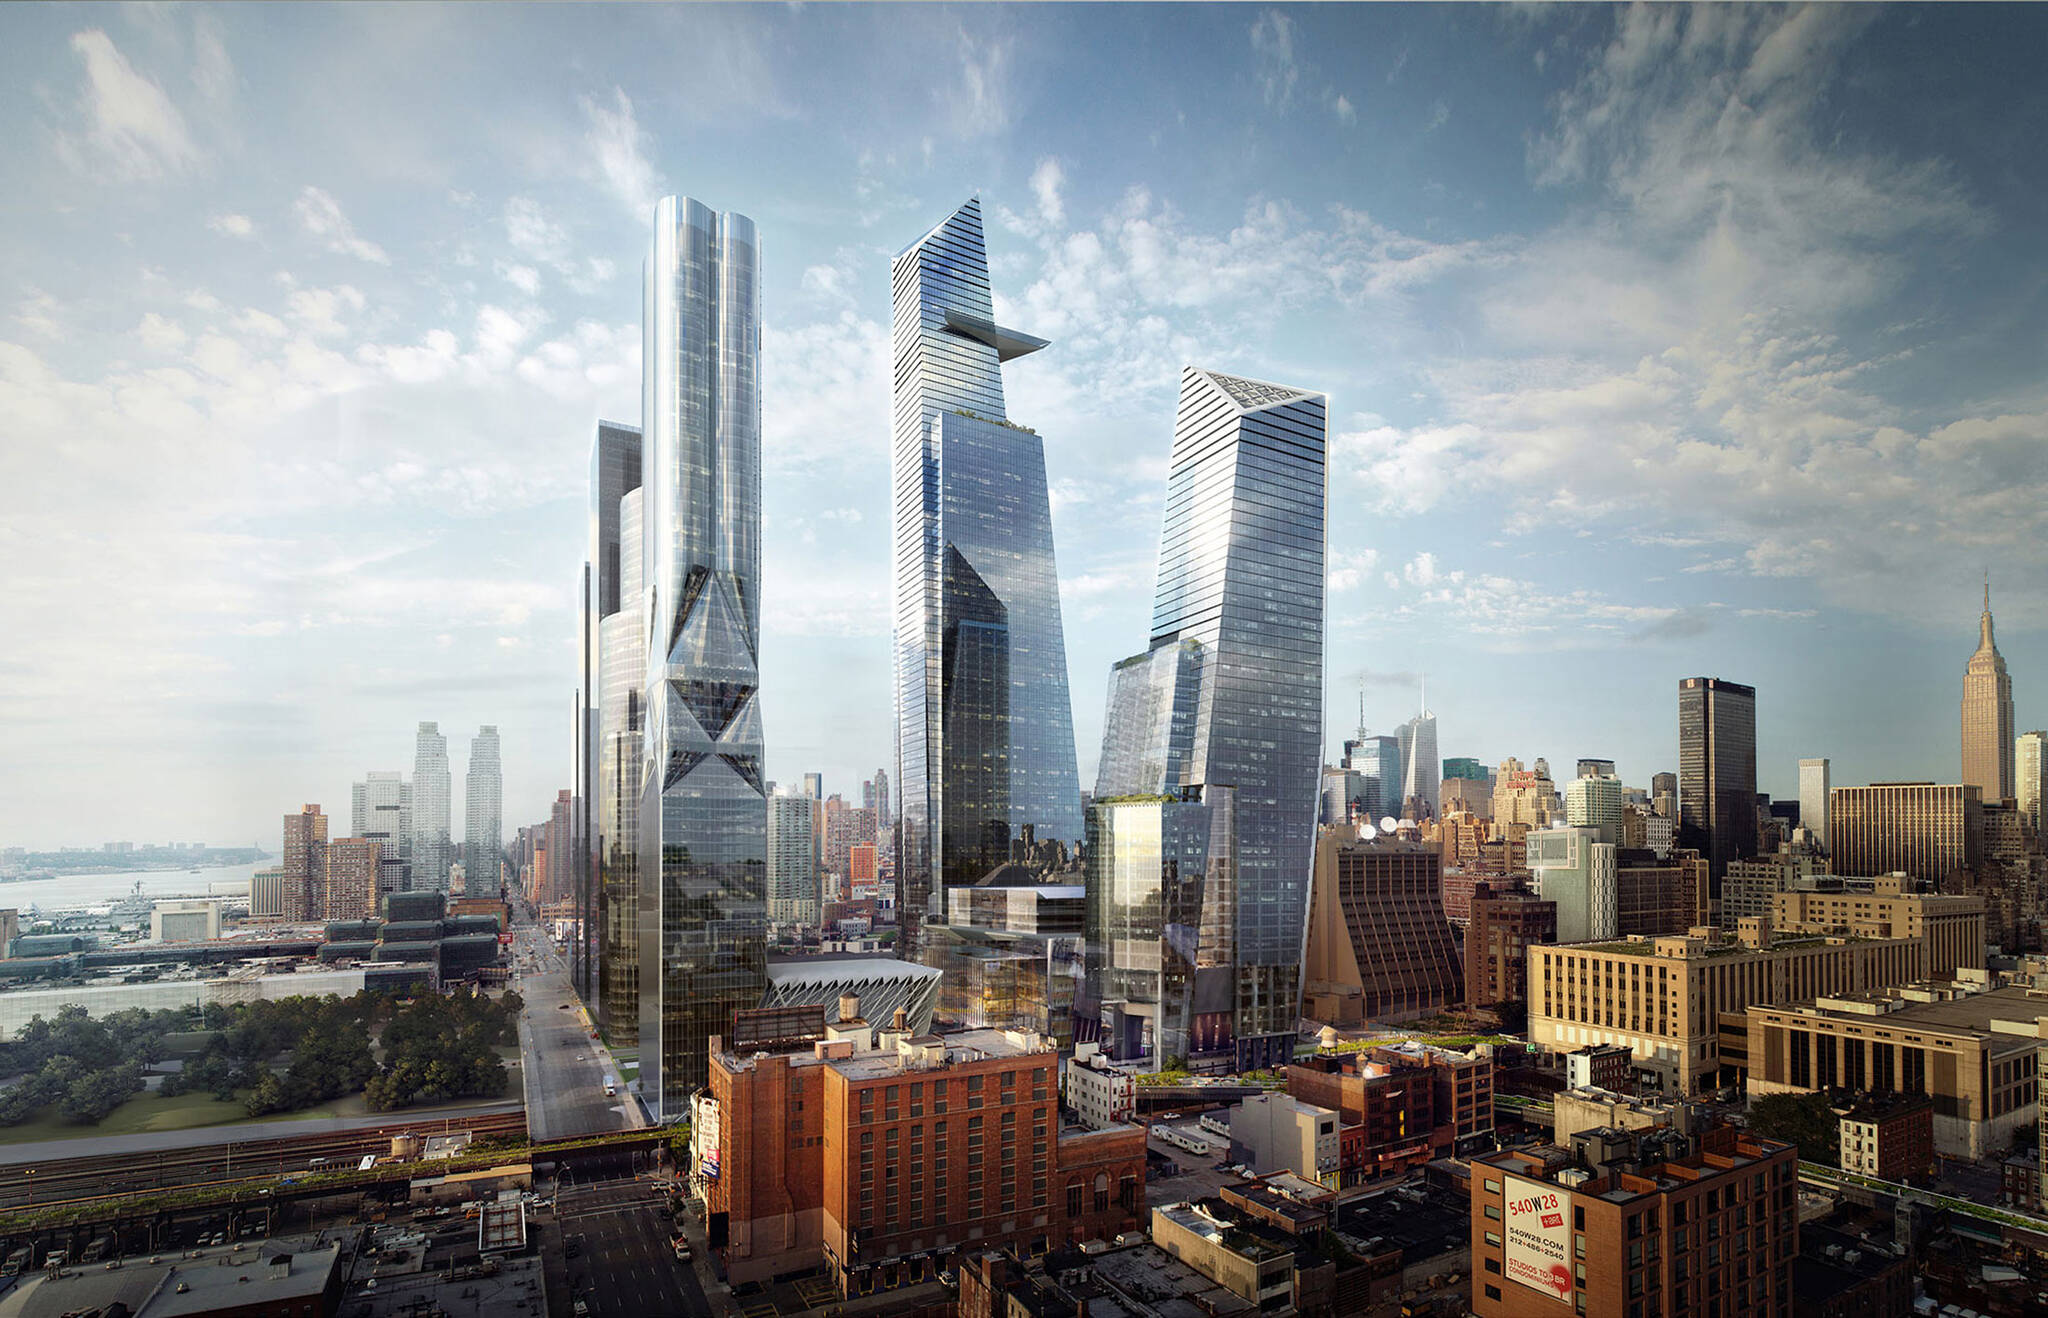 Aerial view of the surrounding buildings of the Hudson Yards Autograph Hotel project by Marriott, a modular hotel tower located at 432 West 31st Street in Hudson Yards, New York City designed by the architecture studio Danny Forster & Architecture